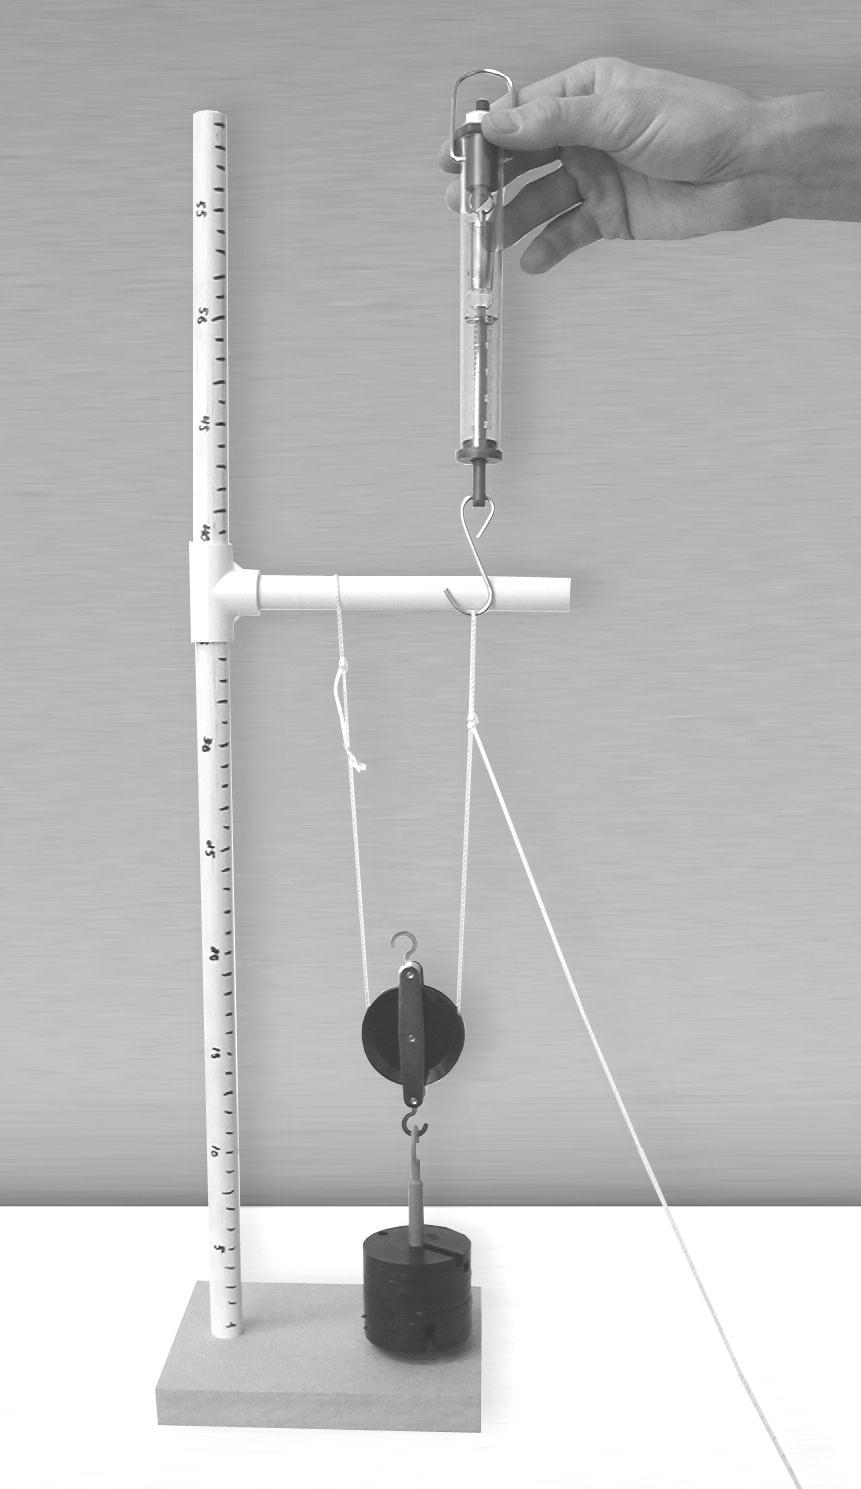 Place the hook of the spring scale in this loop. 8. Using the spring scale, the pulley cord, and the pulley, raise the hanging mass to a height 25 cm above the base of the pulley stand.